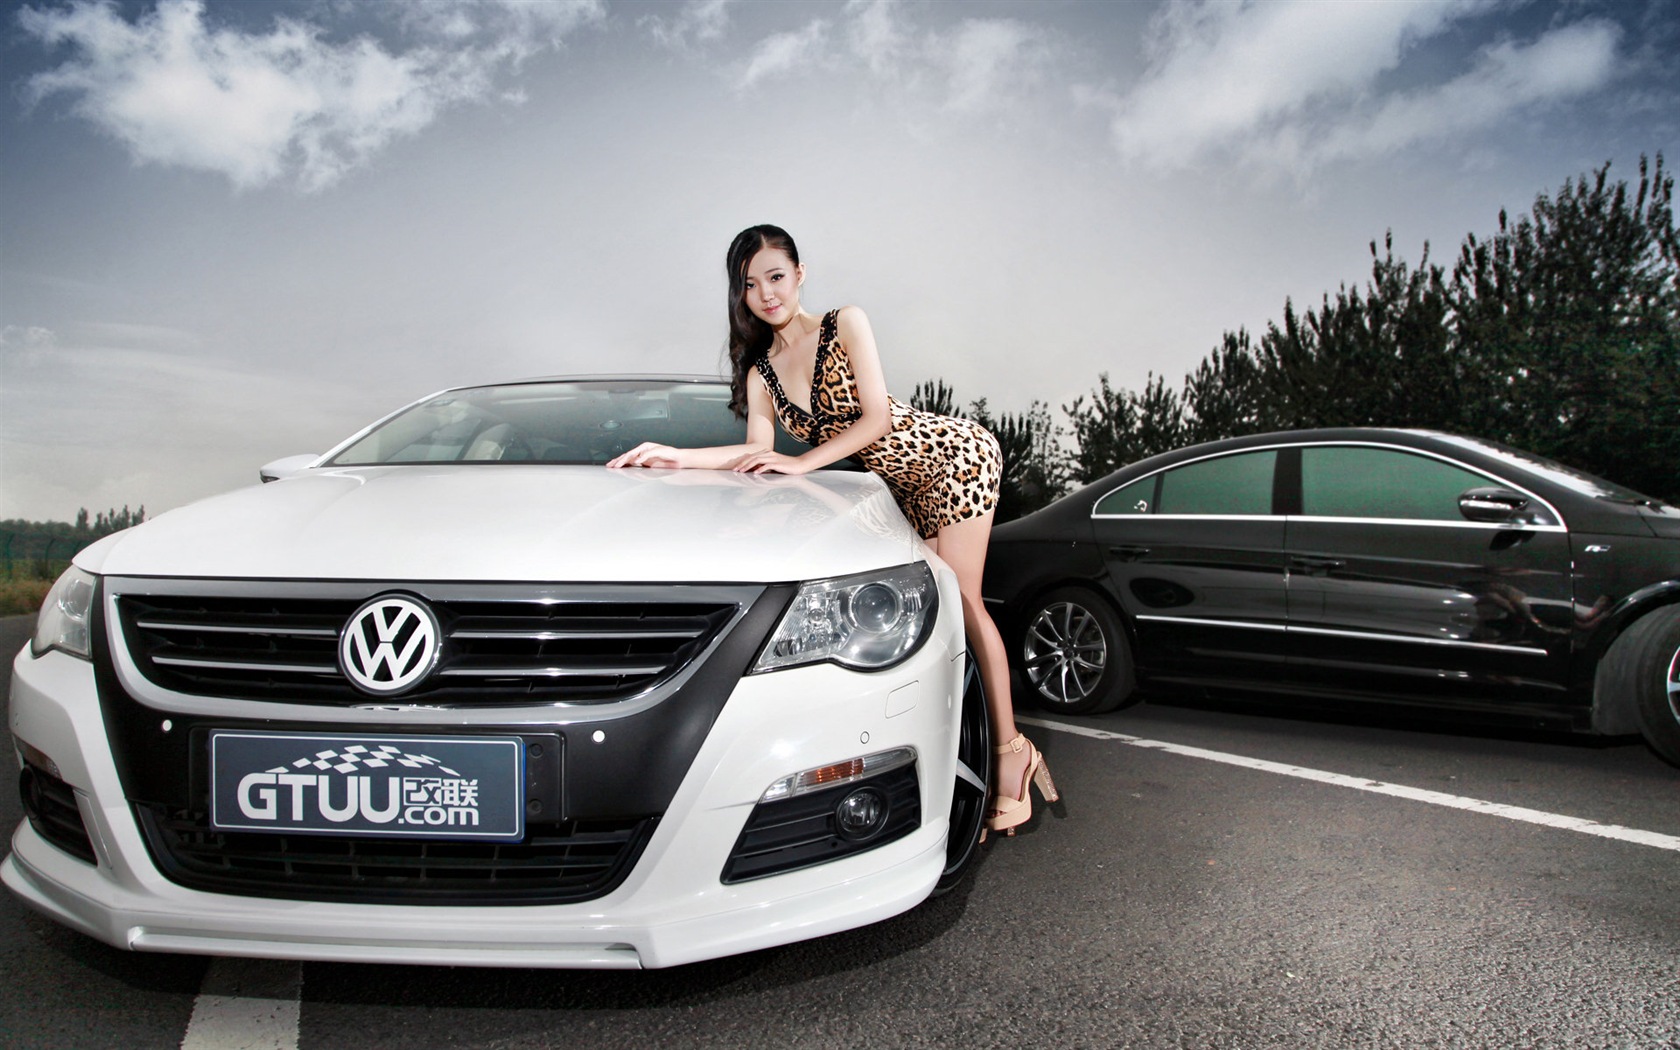 Beautiful leopard dress girl with Volkswagen sports car wallpapers #10 - 1680x1050